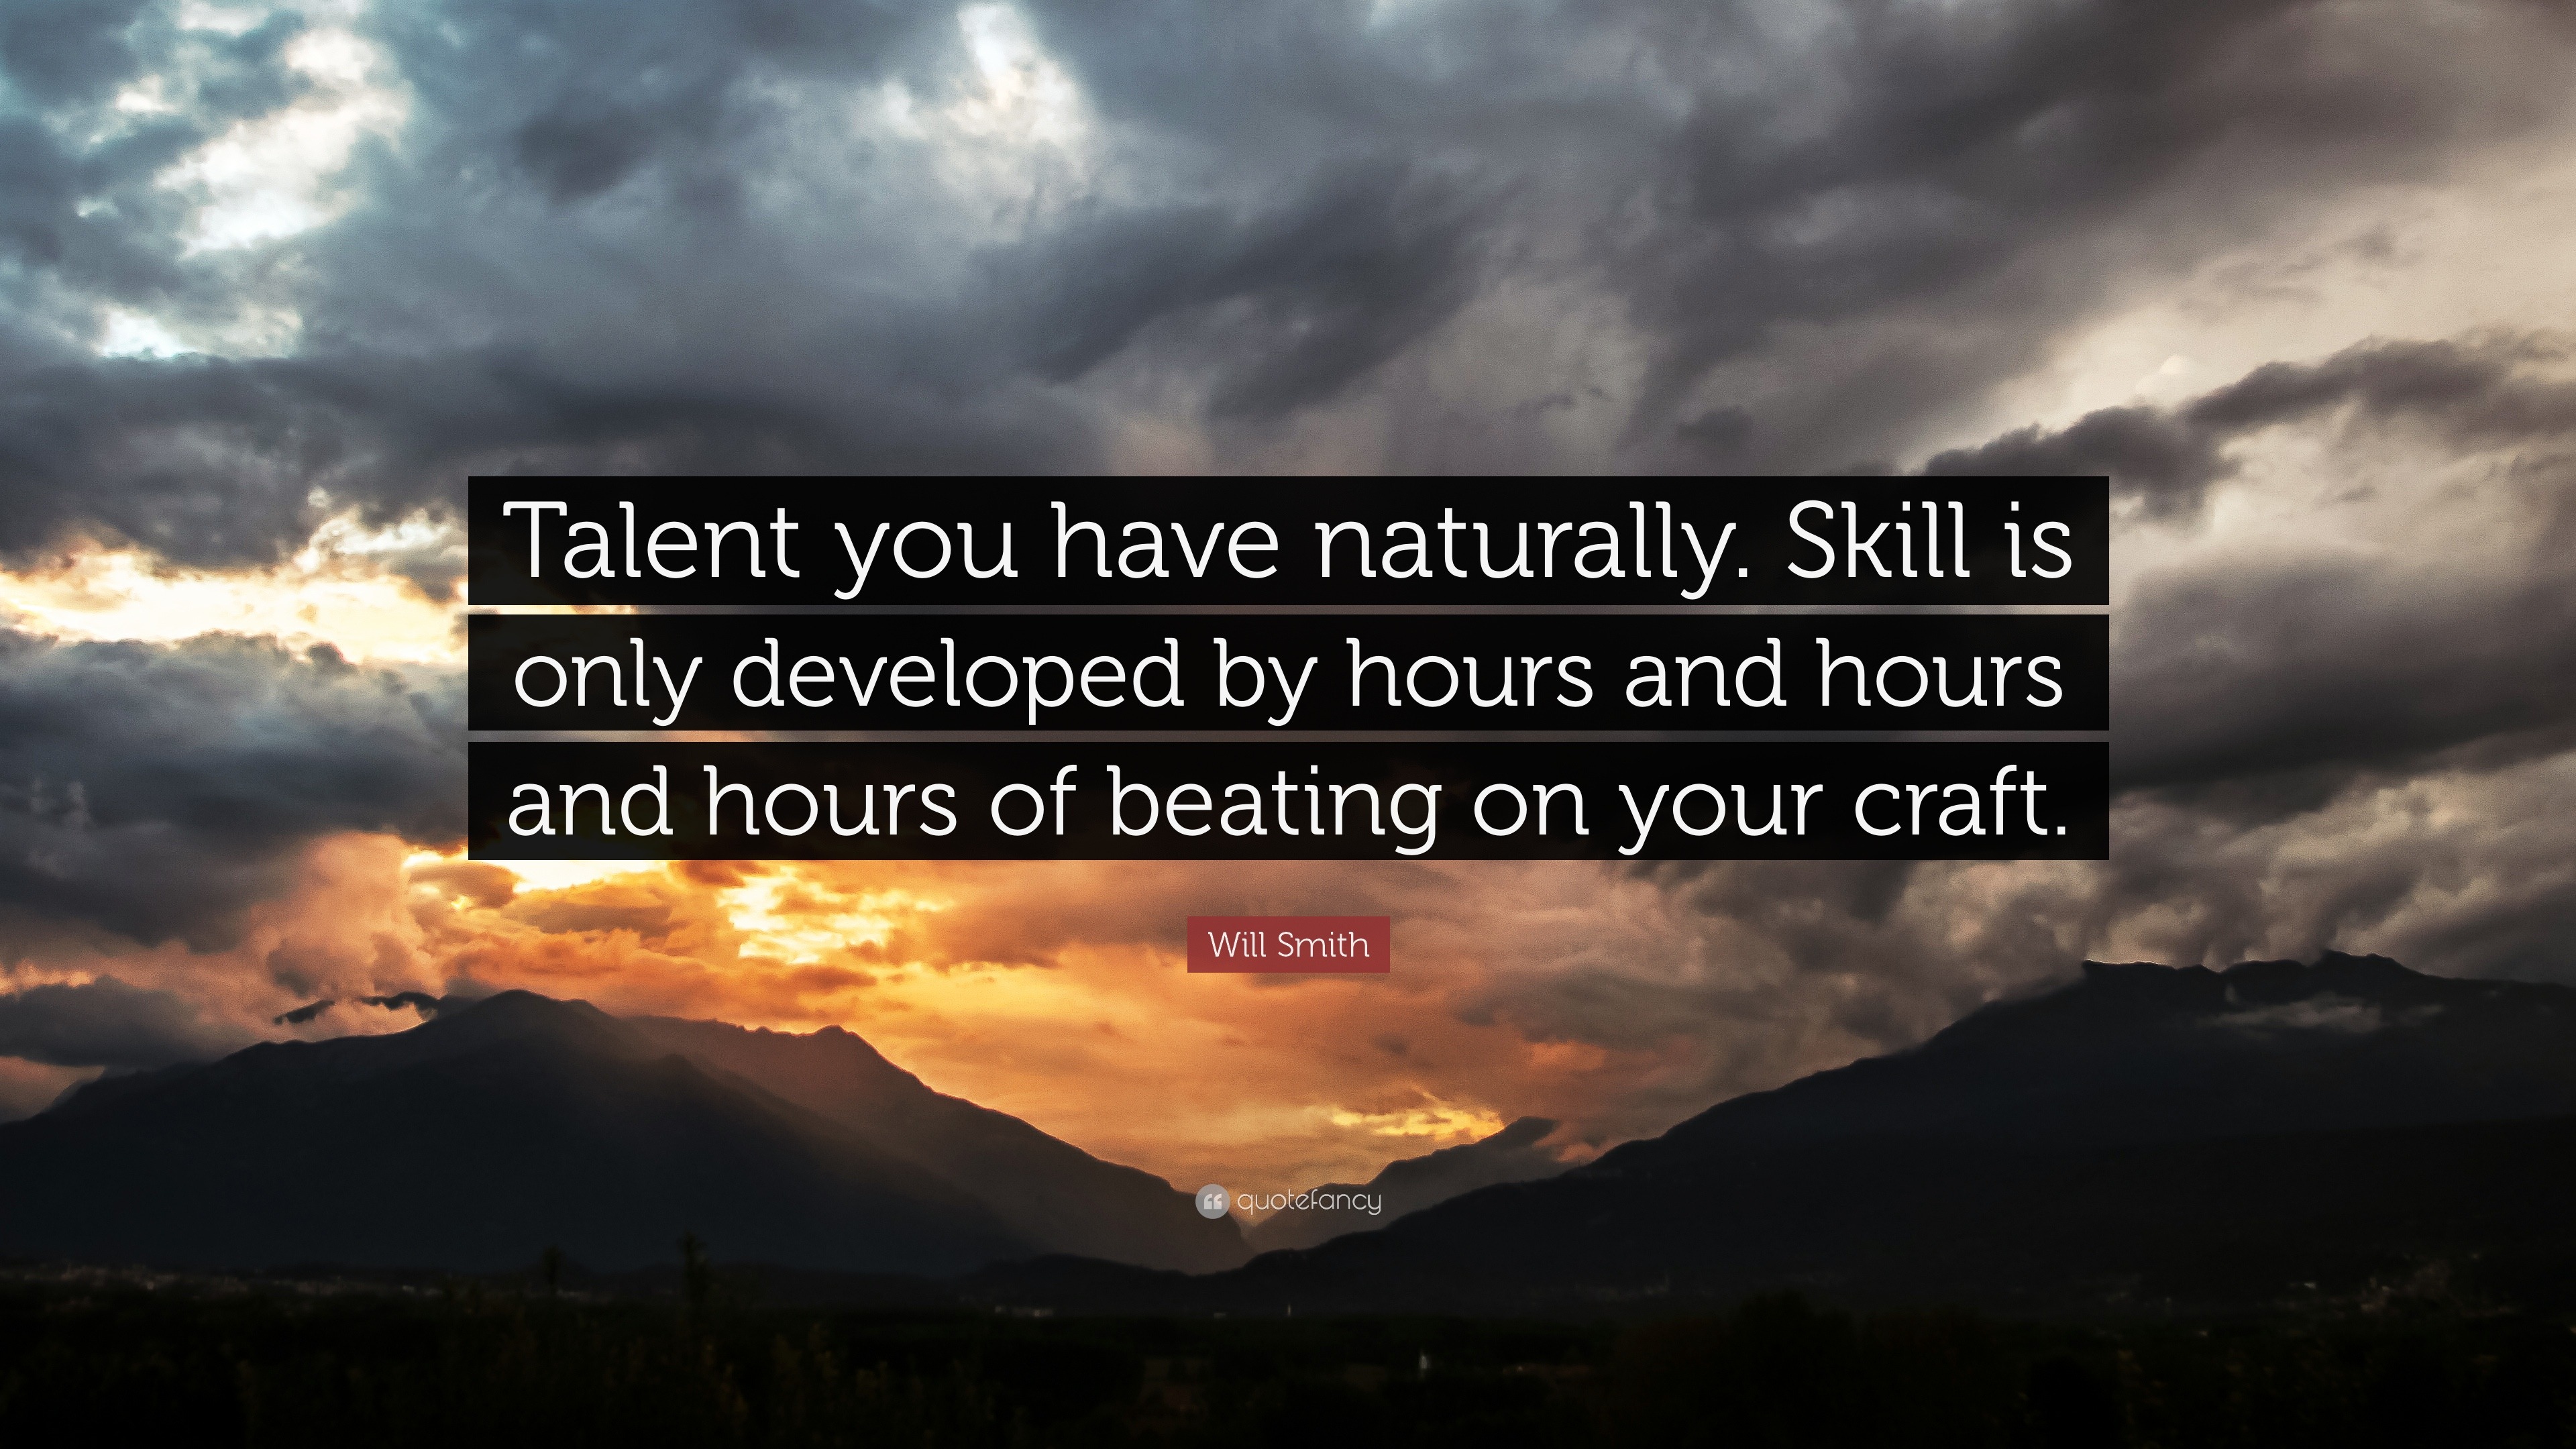 6457-Will-Smith-Quote-Talent-you-have-naturally-Skill-is-only-developed.jpg